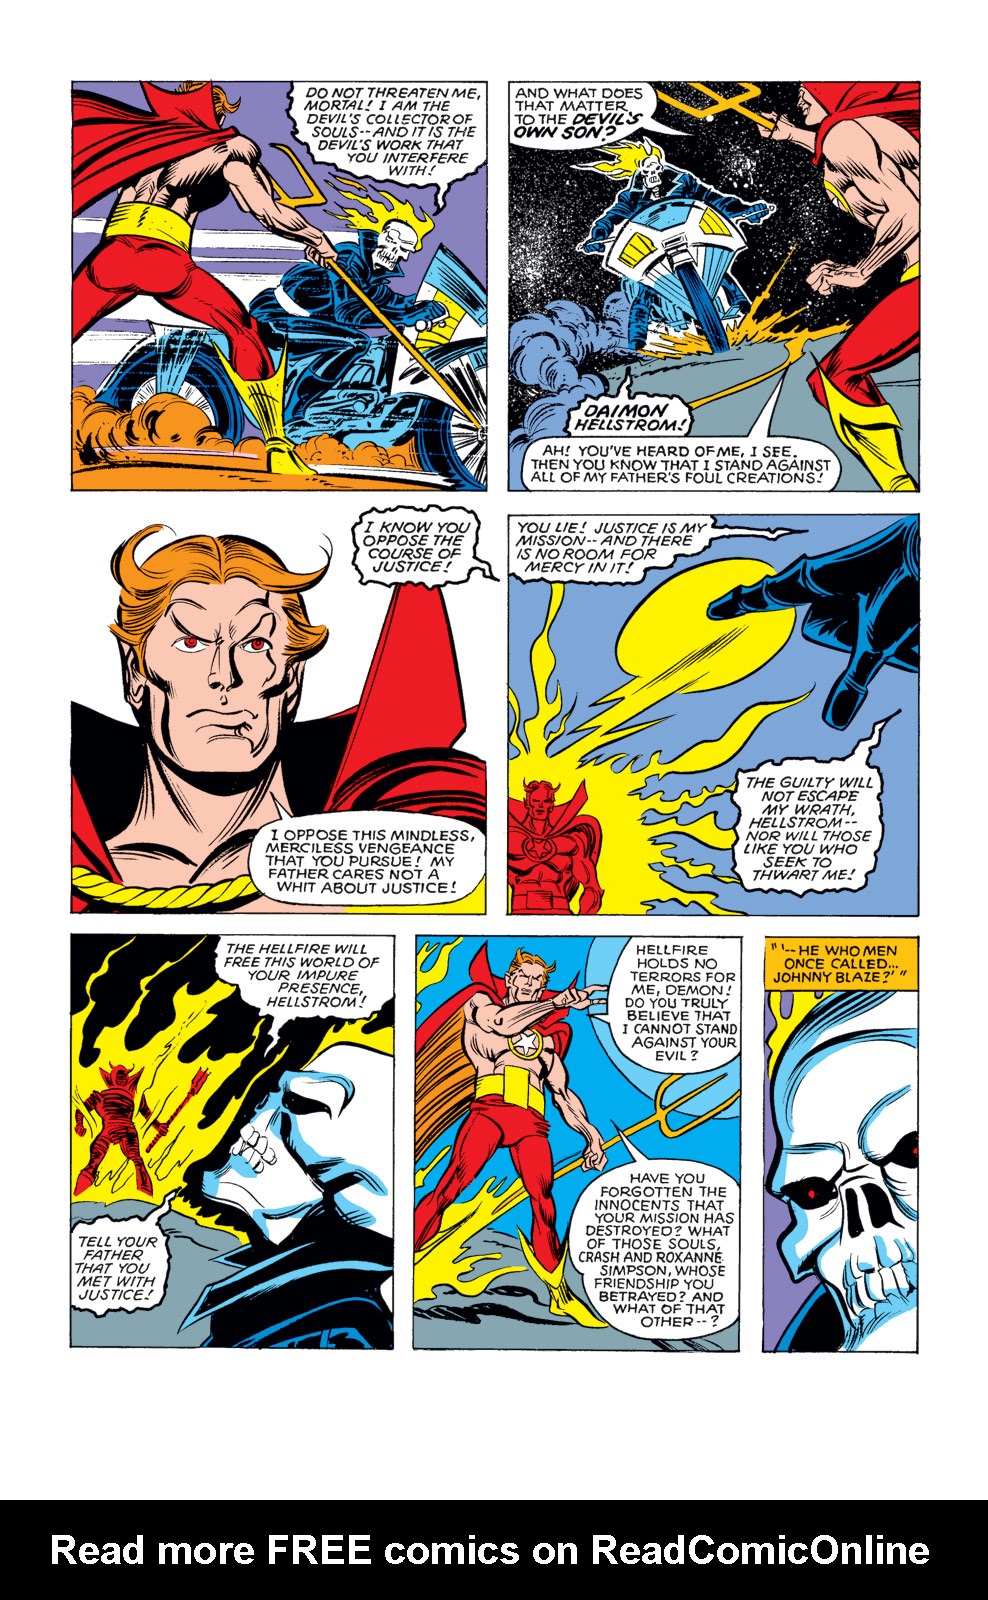 What If? (1977) issue 17 - Ghost Rider, Spider-Woman and Captain Marvel were villains - Page 4